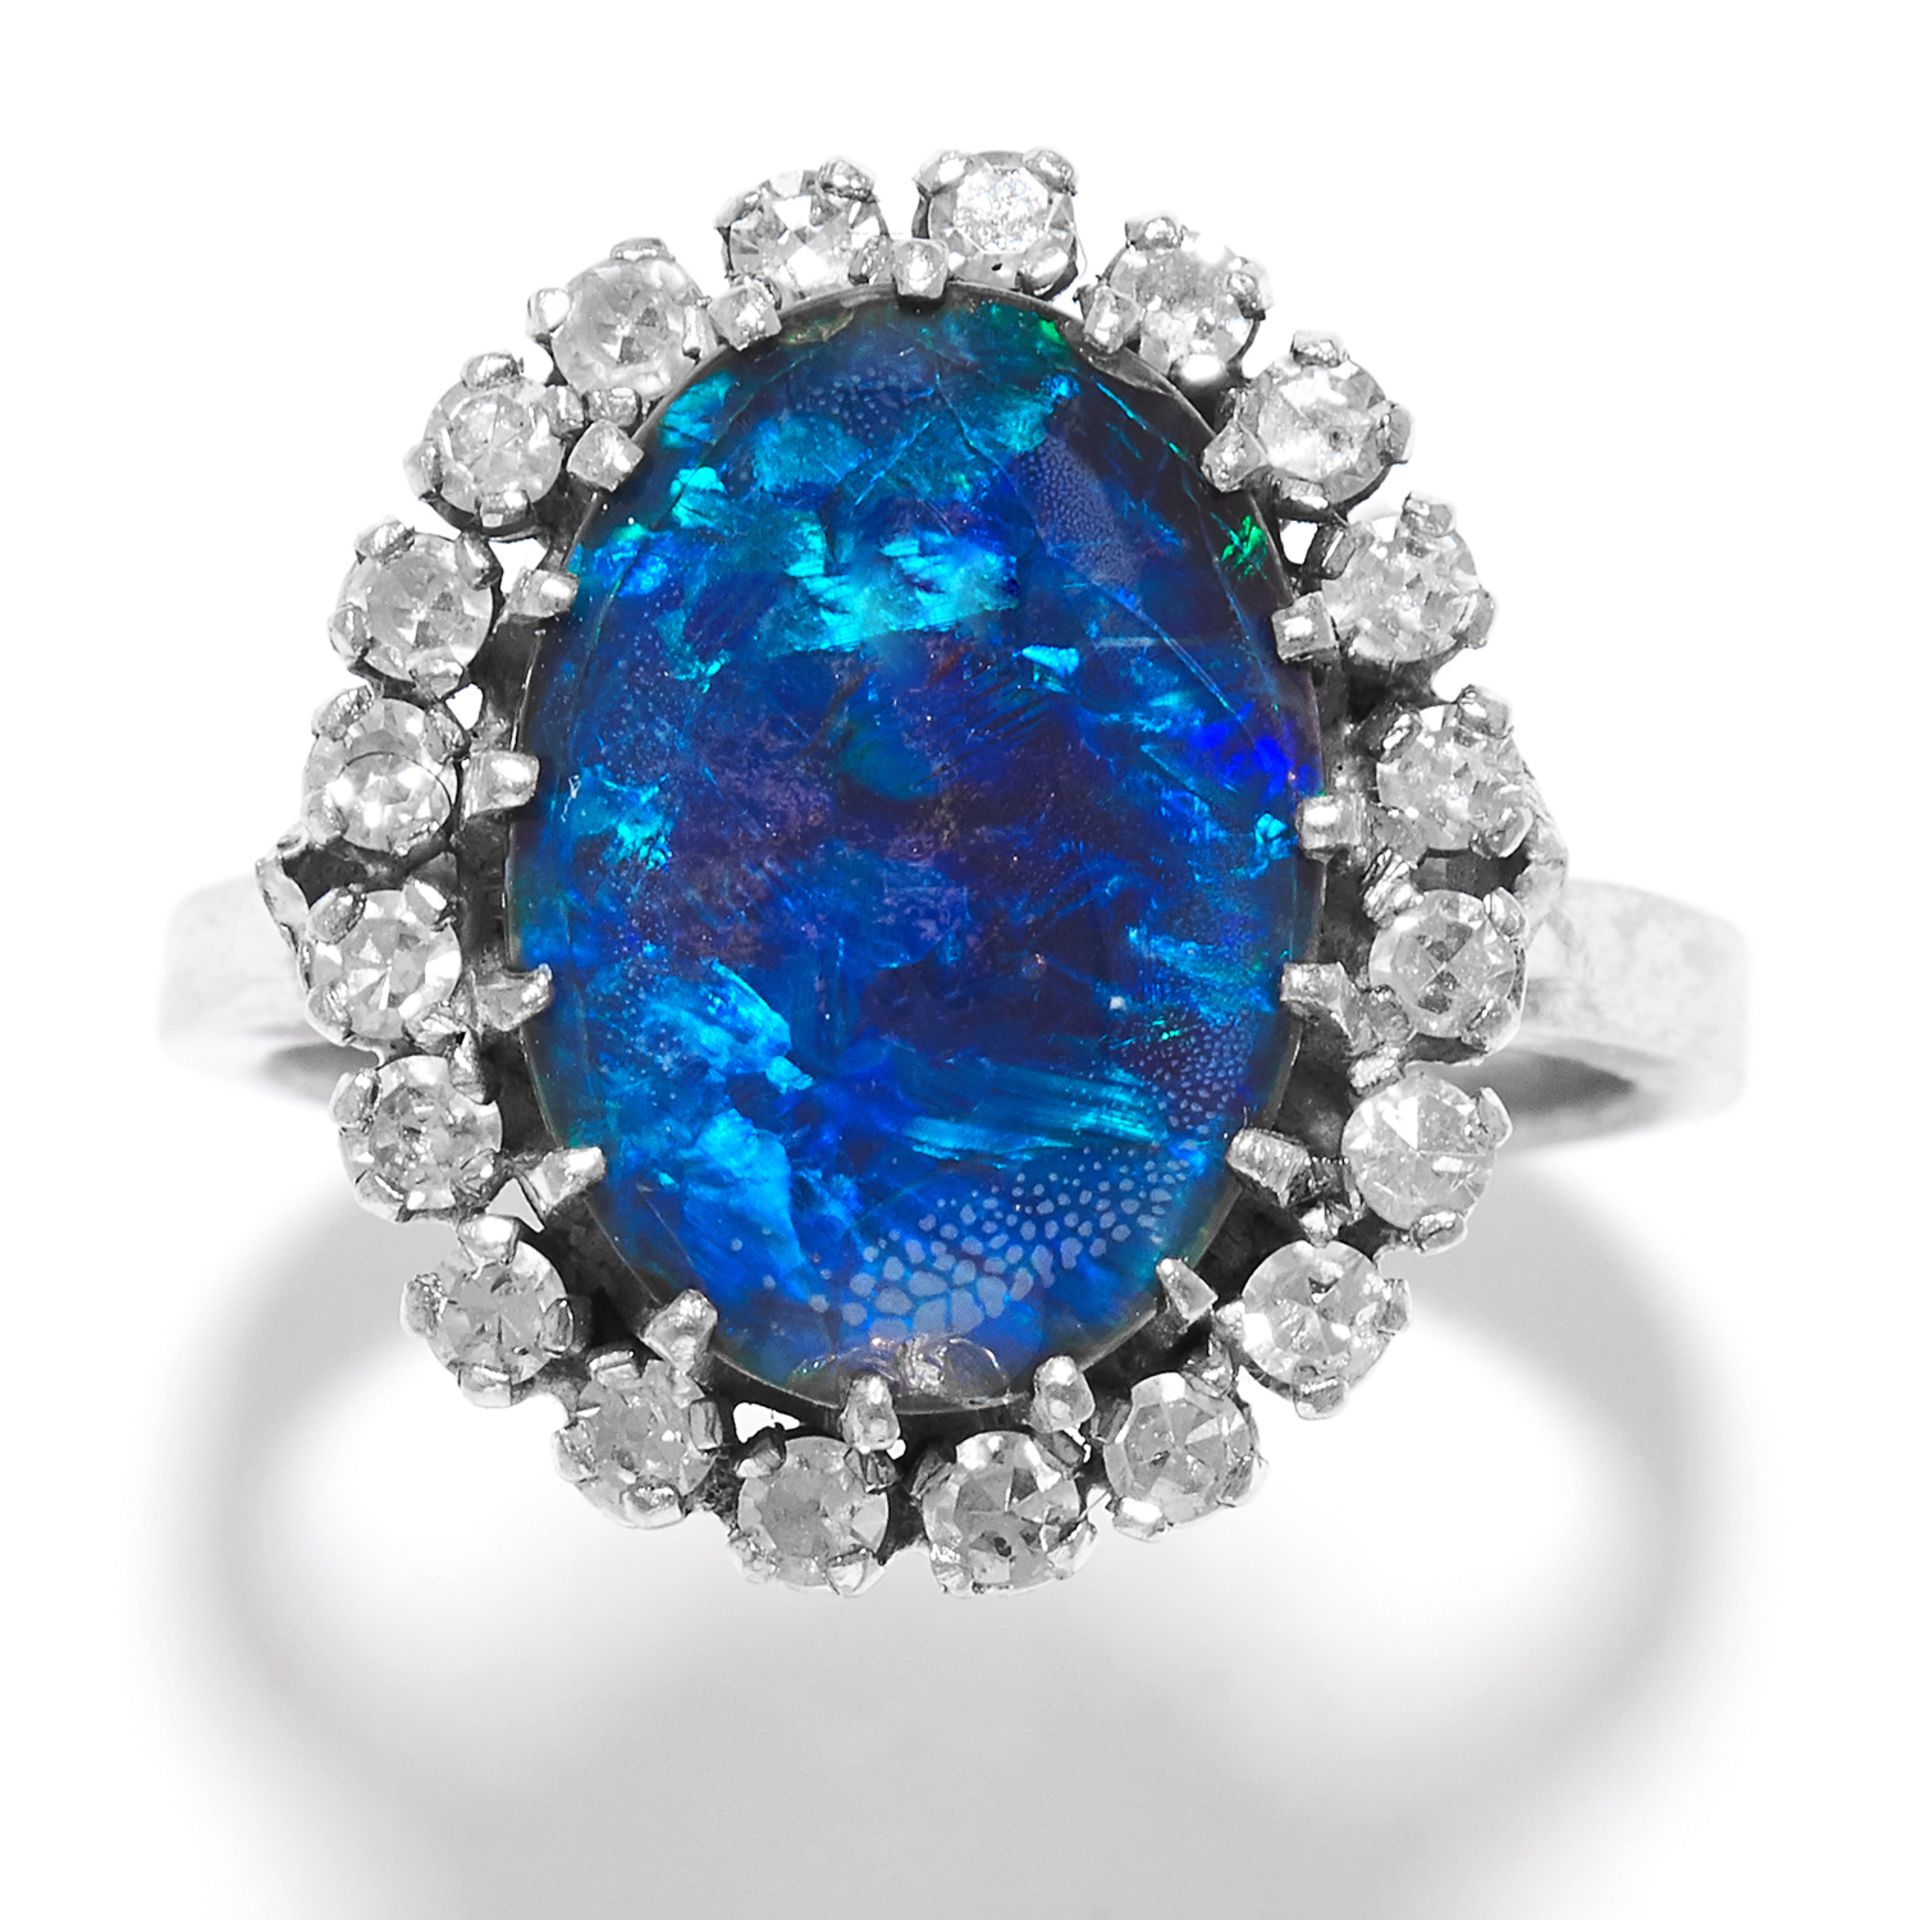 BLACK OPAL AND DIAMOND CLUSTER RING in 18ct white gold, set with a cabochon black opal doublet in